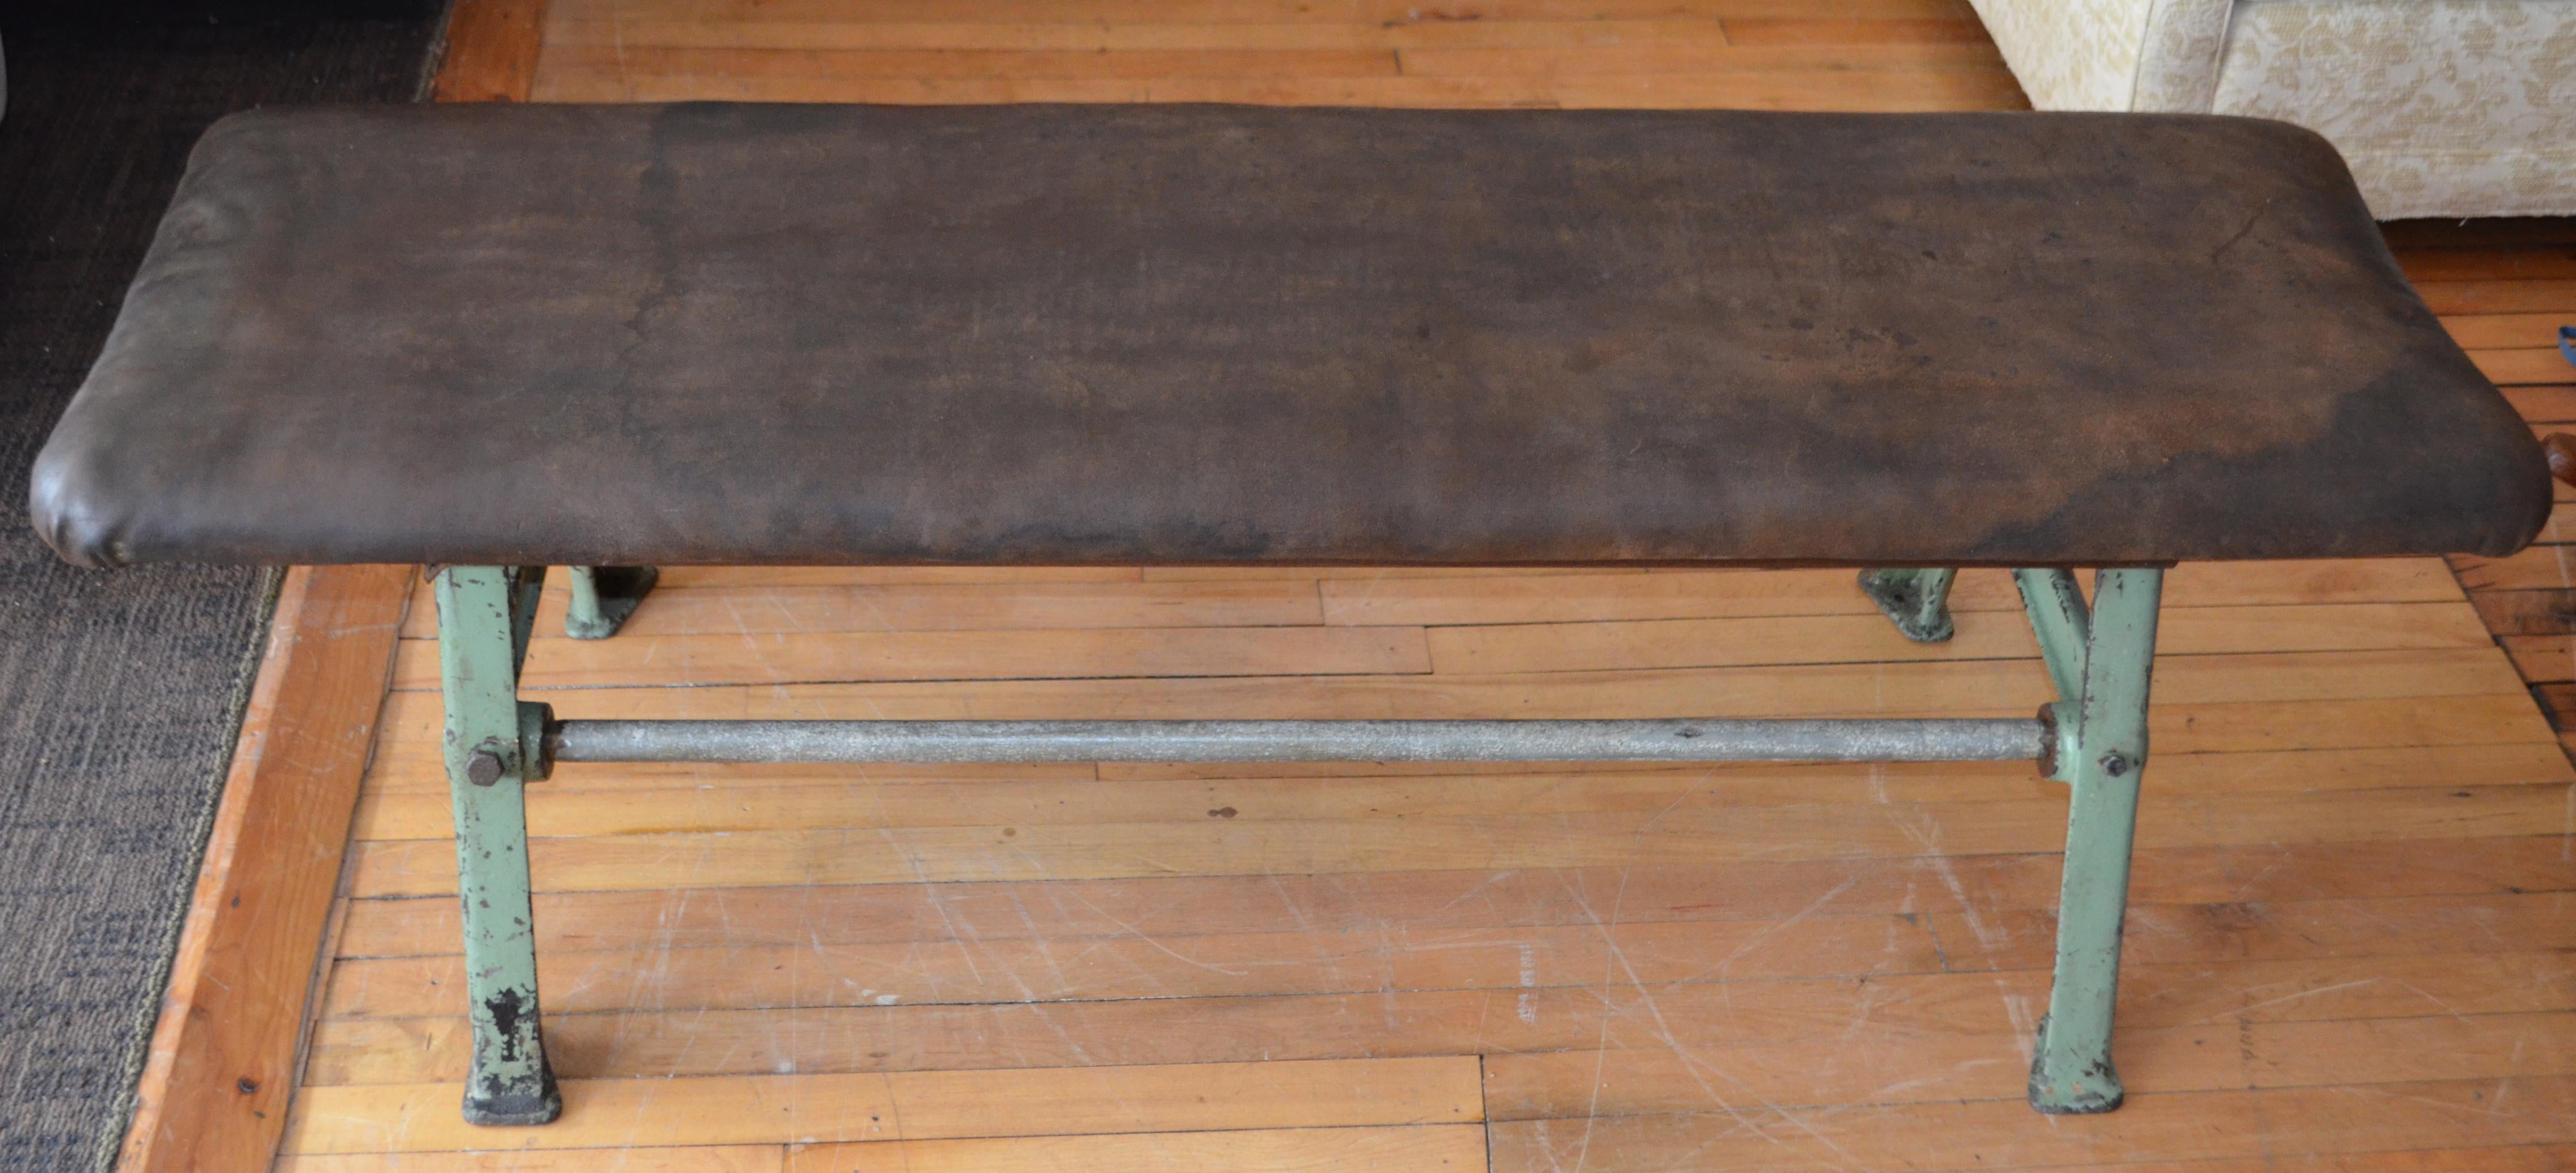 Early 20th century suede leather bench with rock solid, Industrial, forged iron base. Rock solid construction with highly-textured hand of leather. An early weight/barbell bench. Comfortable seating with the sense of strength and endurability